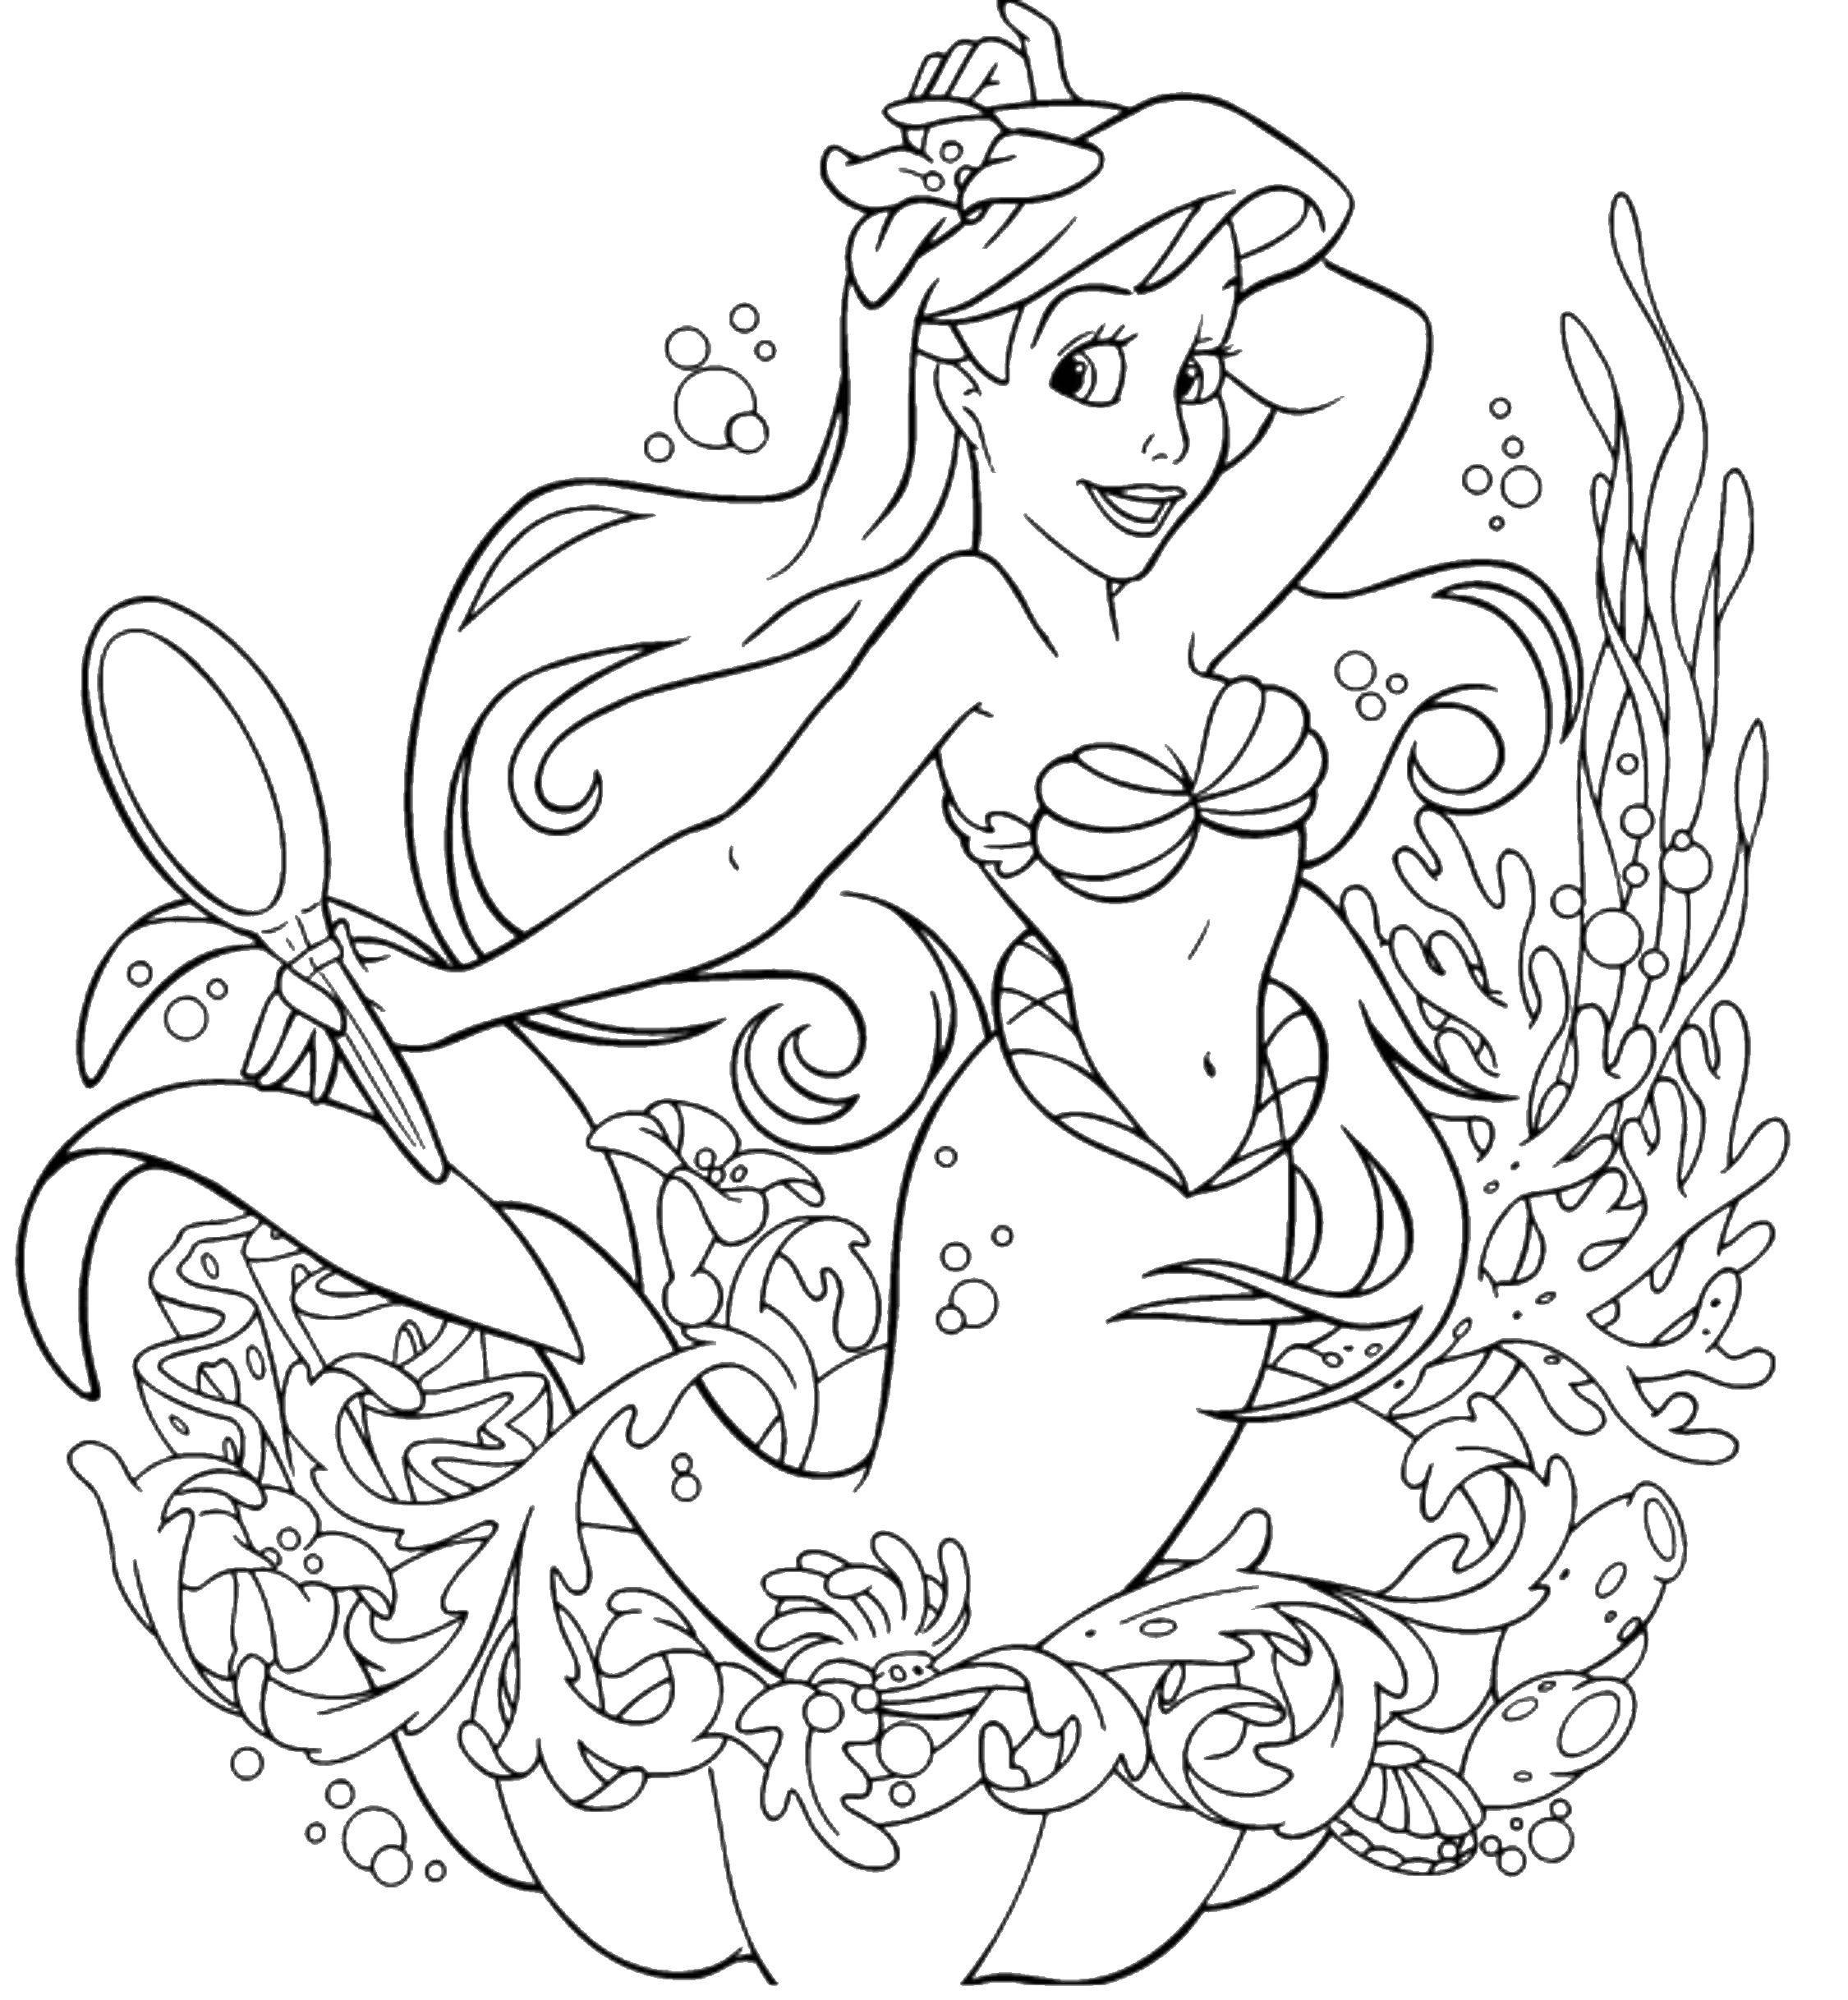 Coloring Ariel preening before the mirror.. Category Princess. Tags:  Disney, the little mermaid, Ariel.